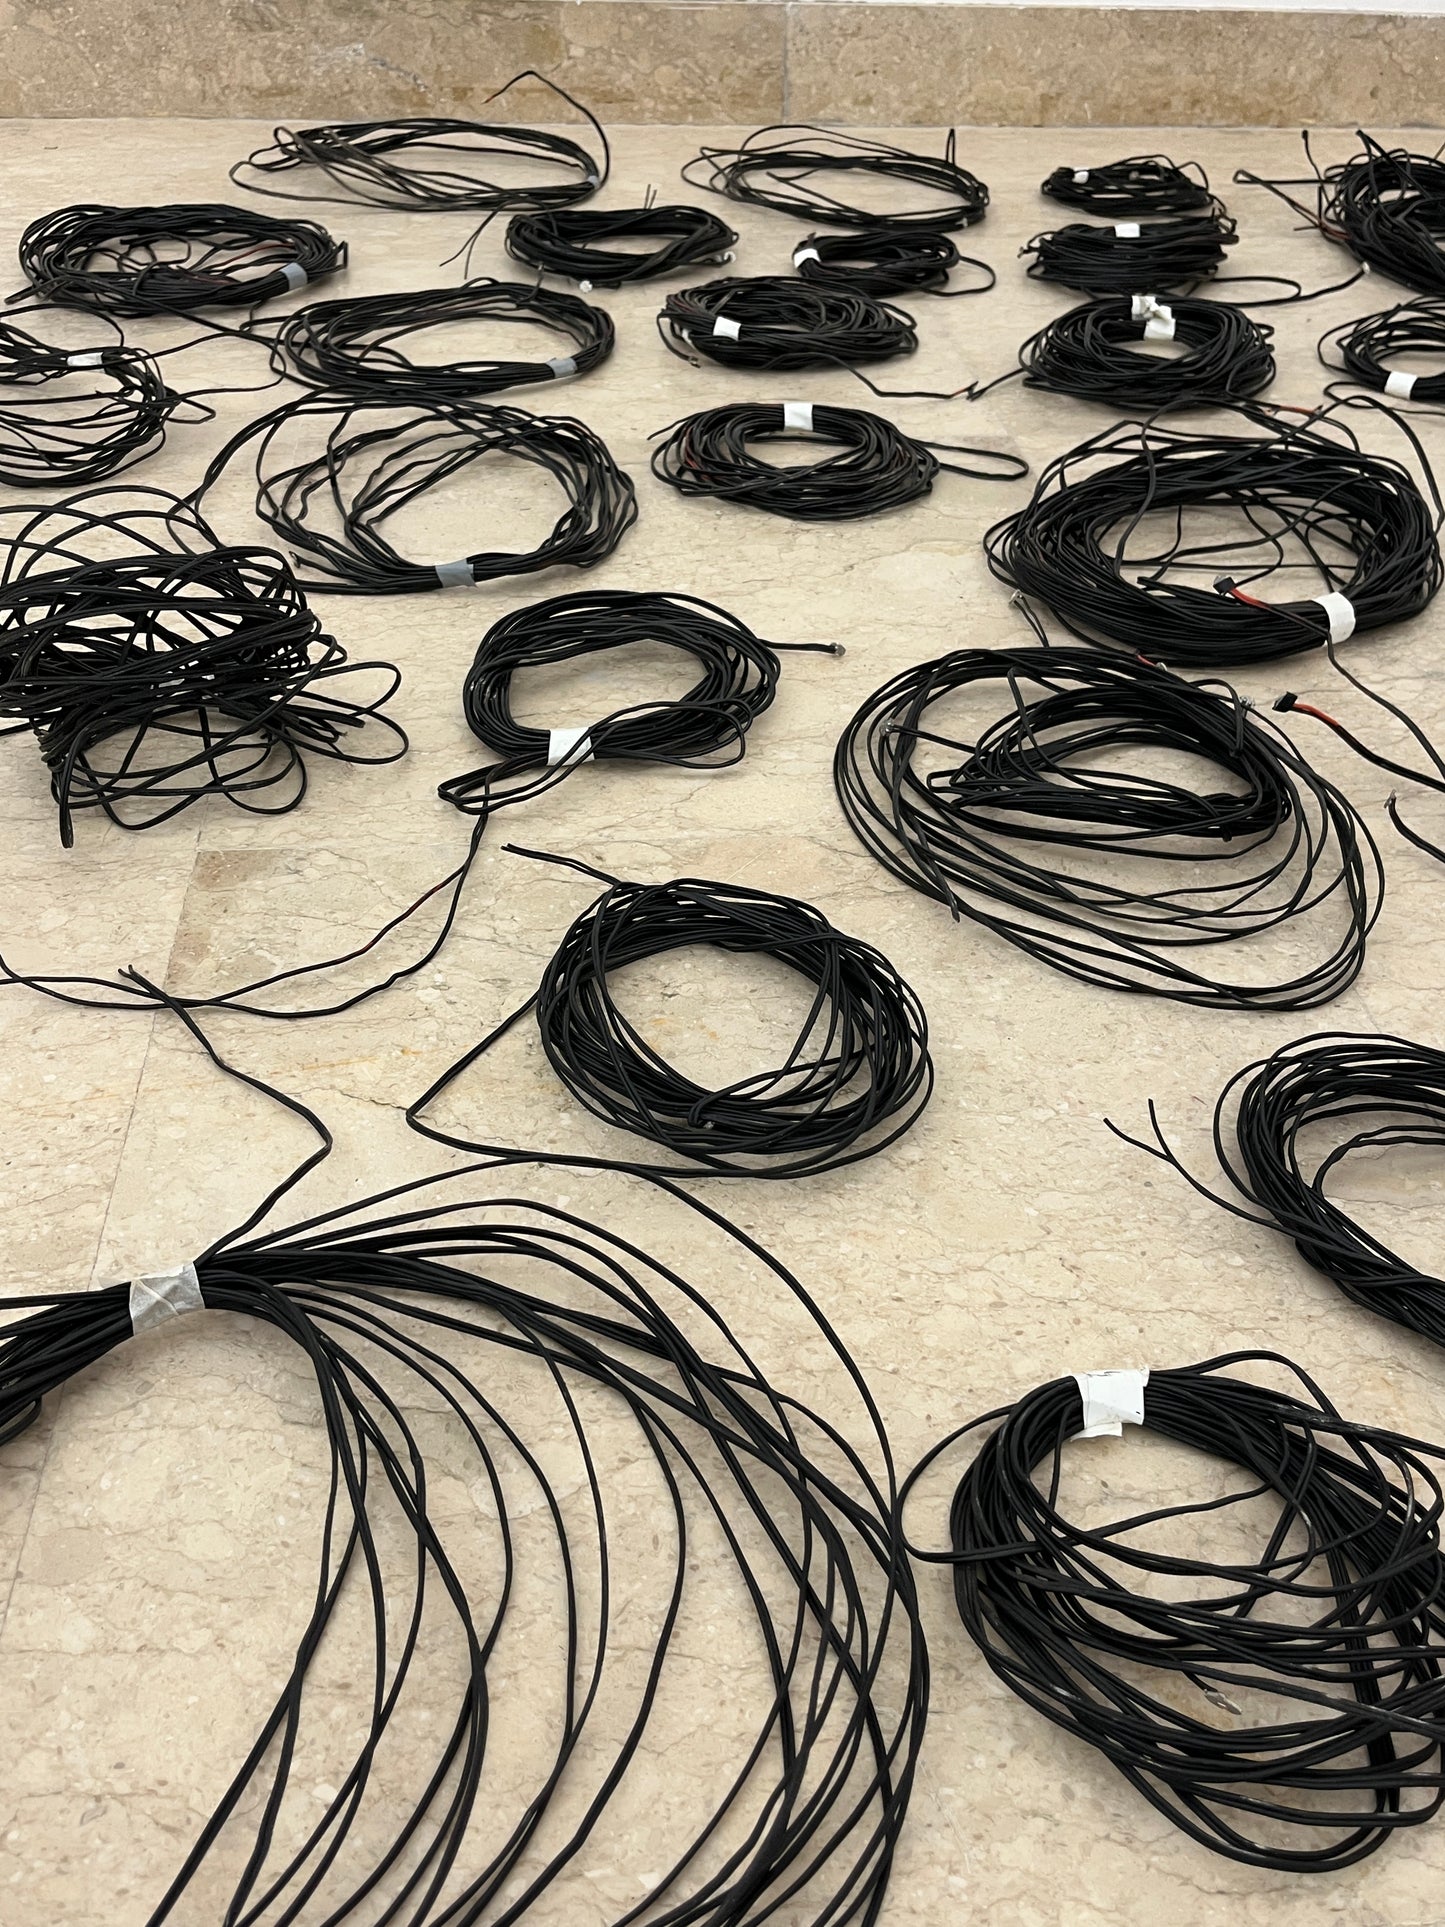 USED UP | Italian Pavilion │ Black Cables, 1.9.14